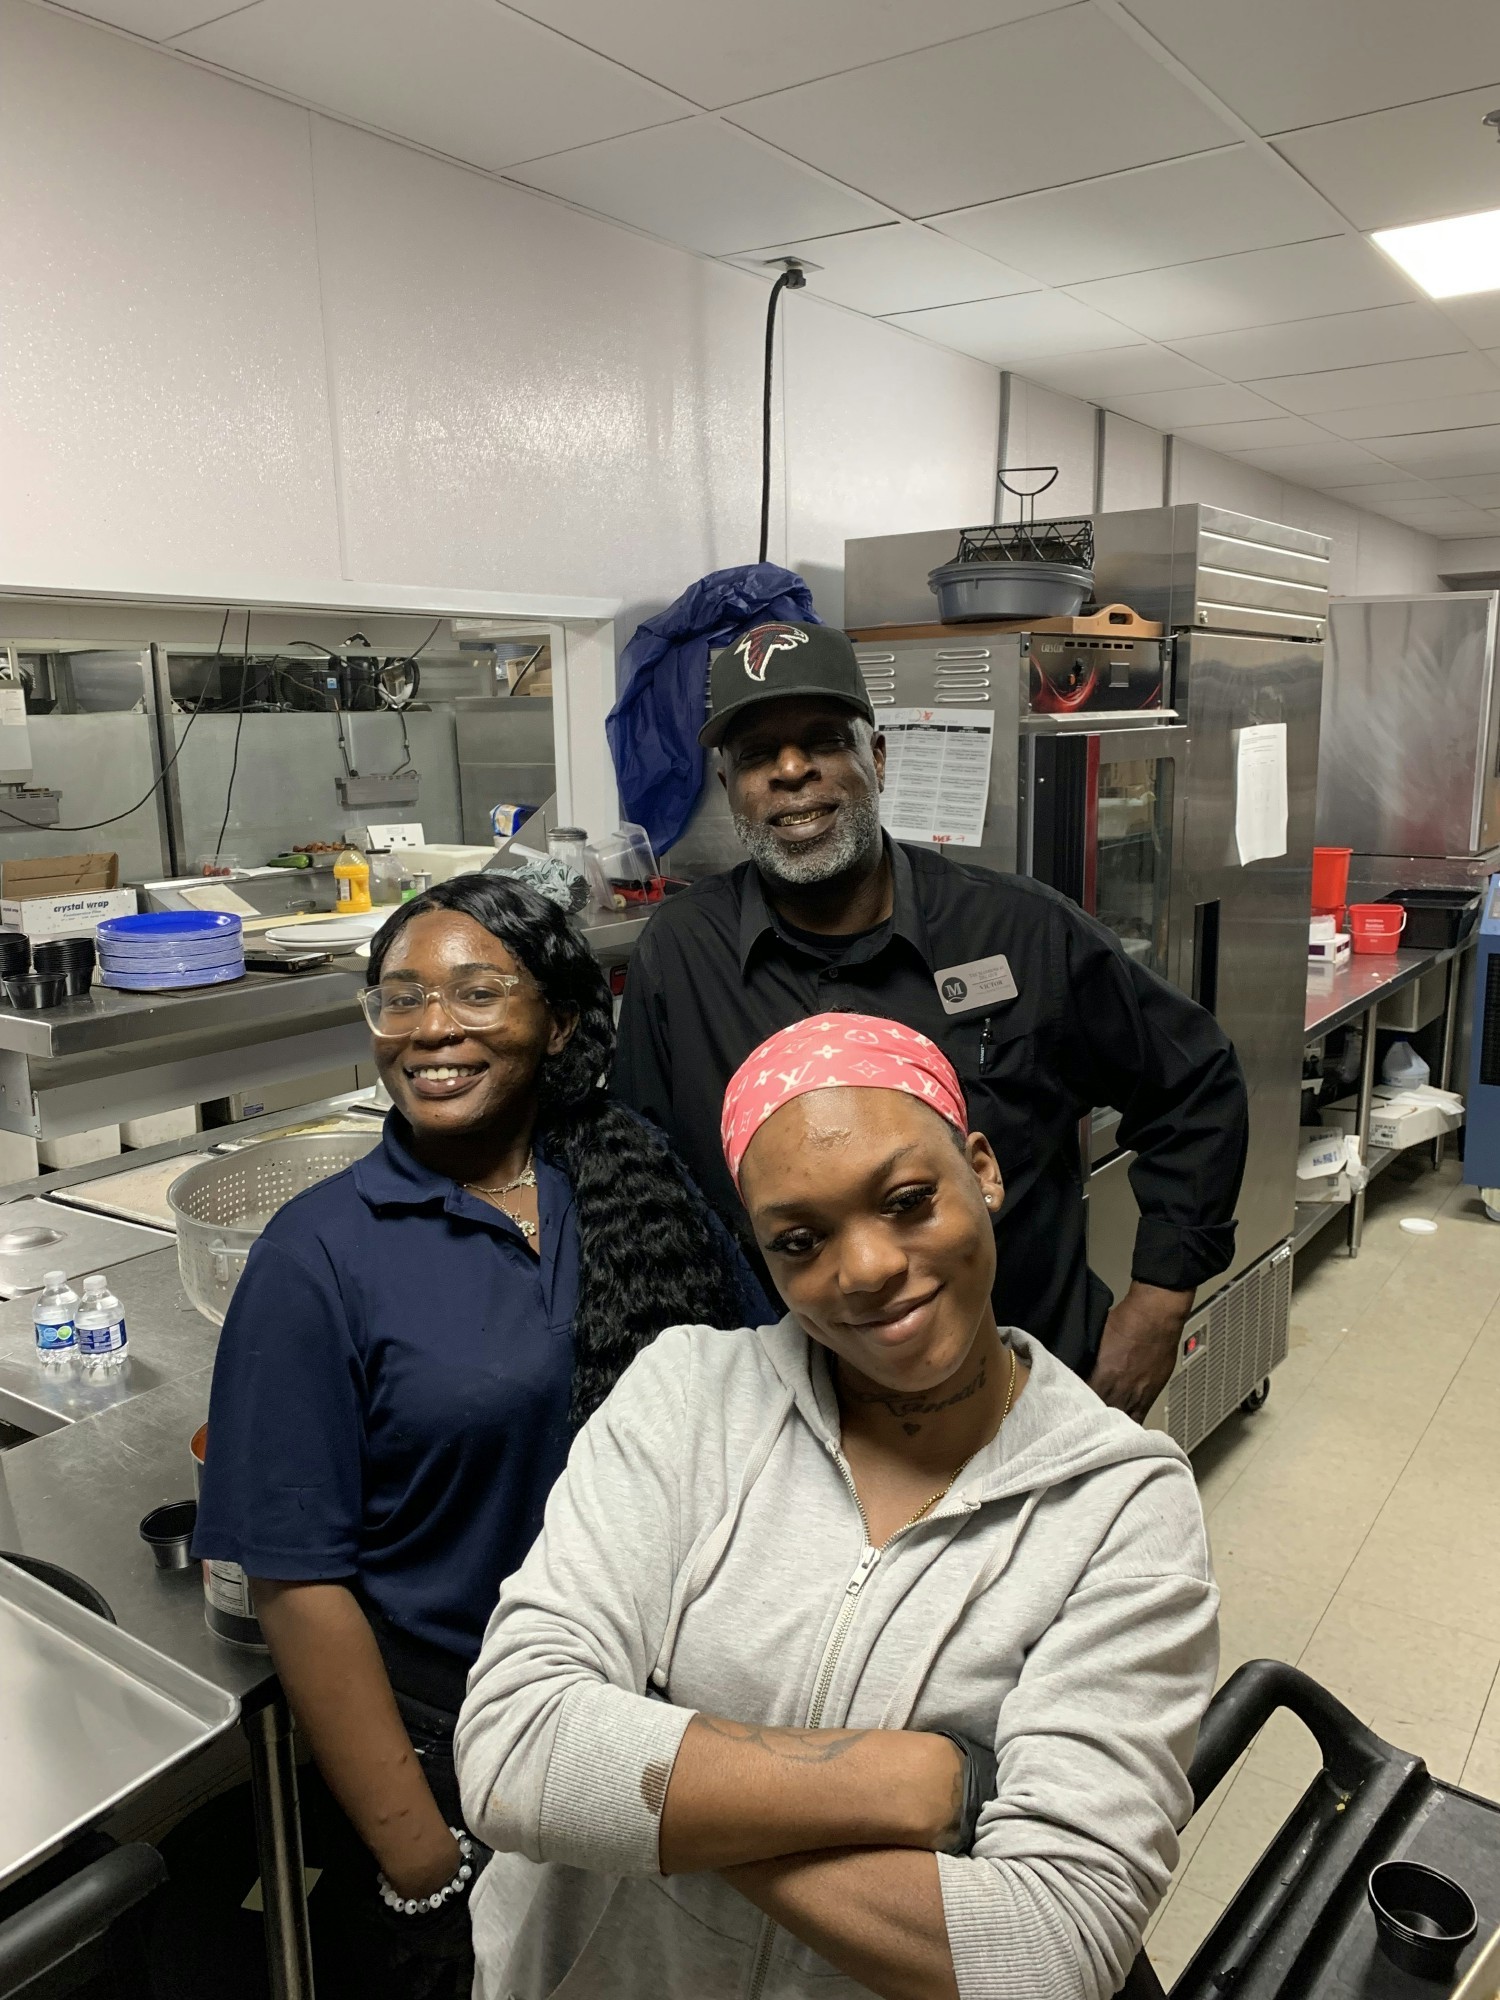 Our dining team is all smiles! 